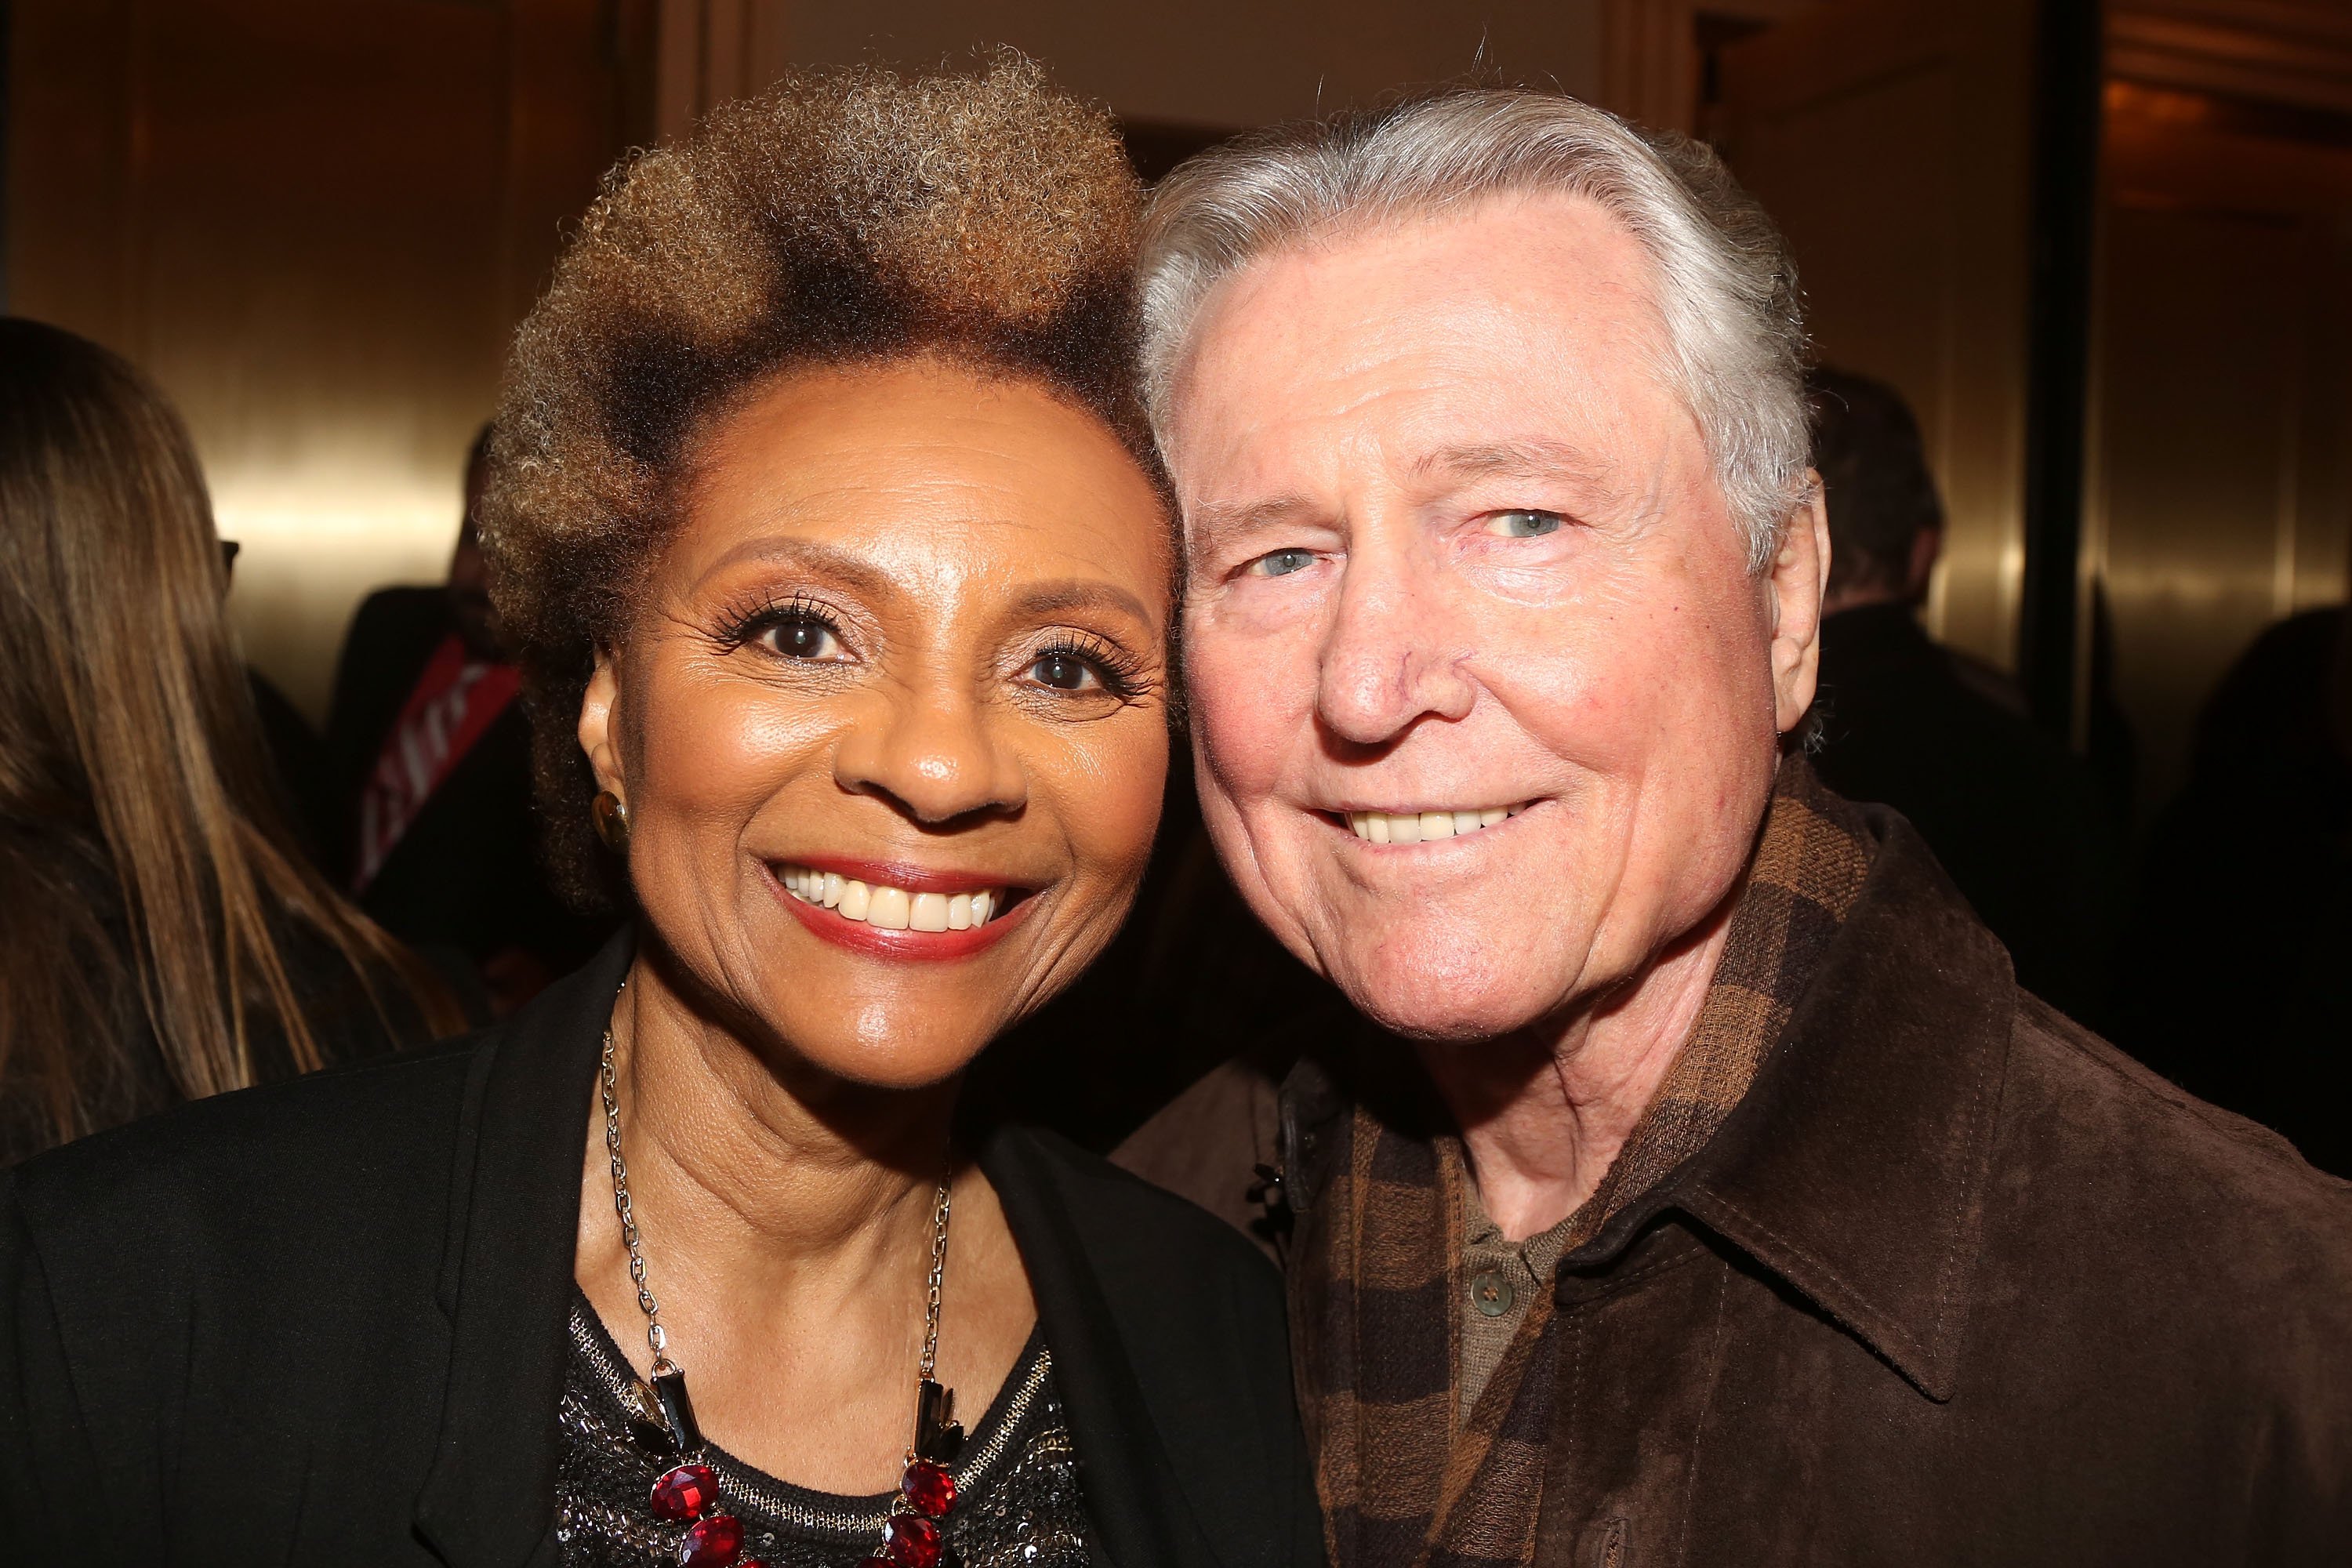 Leslie Uggams and husband Graham pose at The Opening Night Arrivals for "Sylvia" on Broadway at The Cort Theatre on October 27, 2015 in New York City. | Source: Getty Images